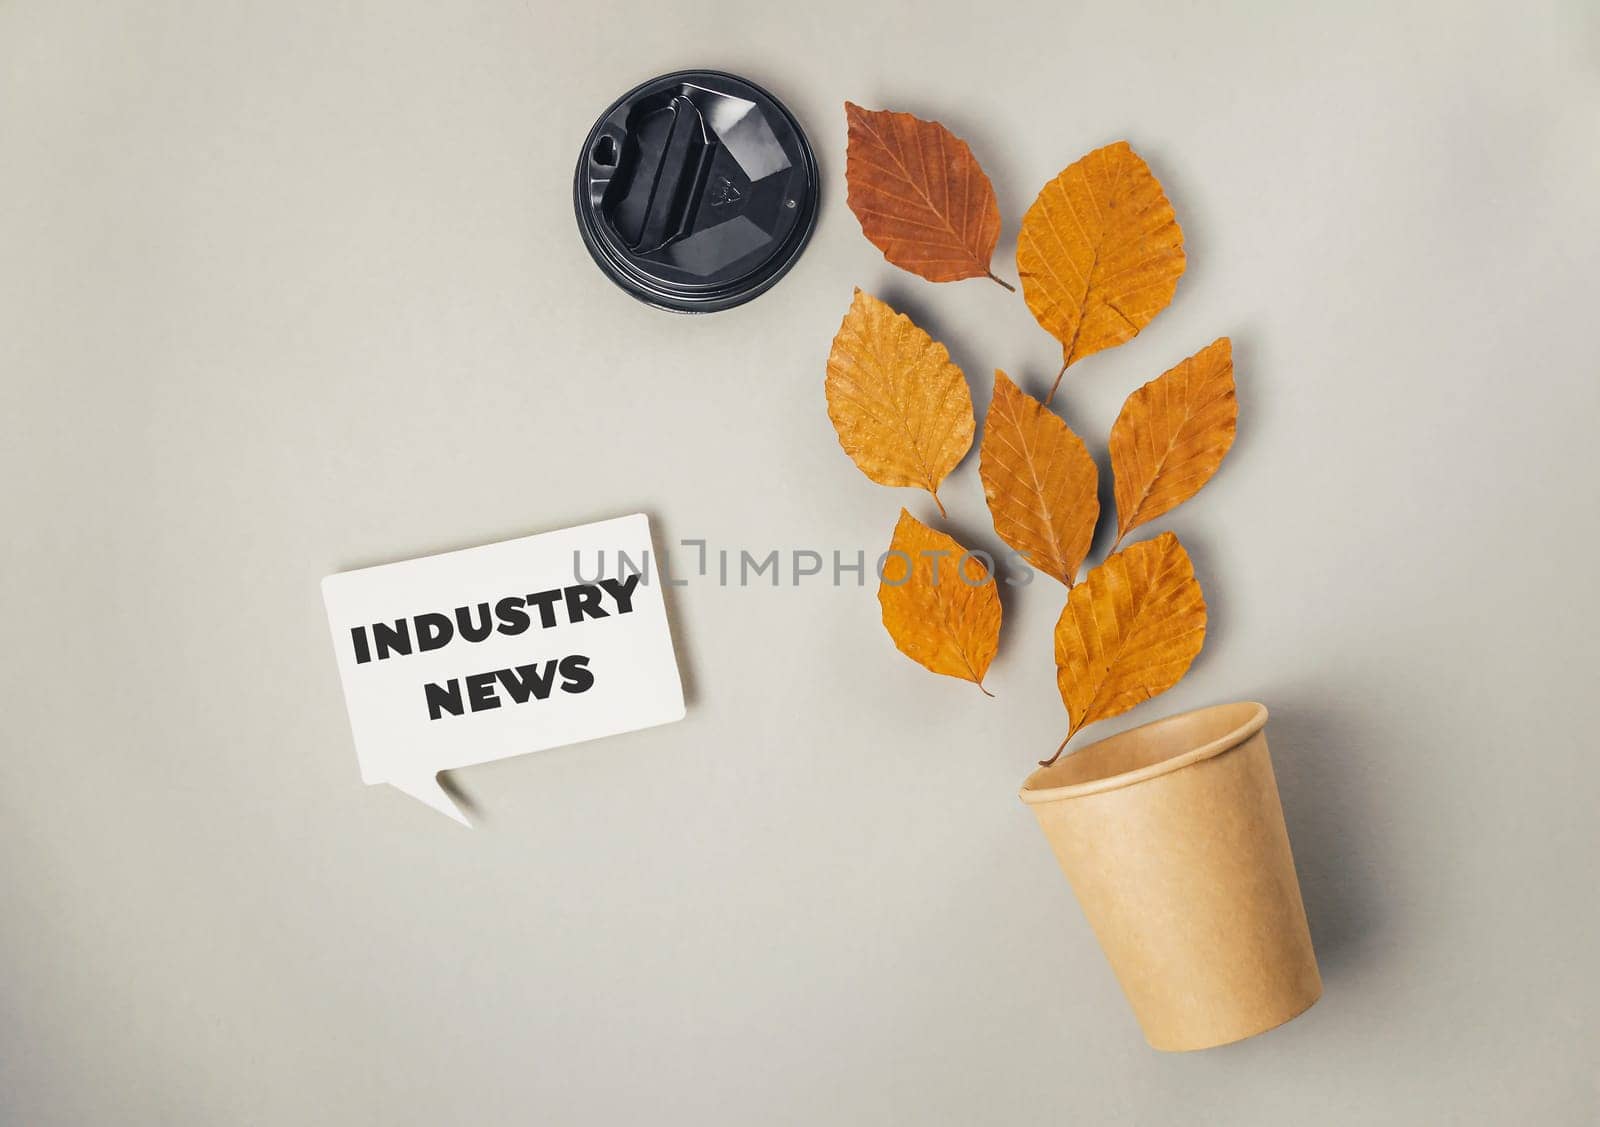 A sign that says Industry News is on a grey background. There is a potted plant with leaves on it